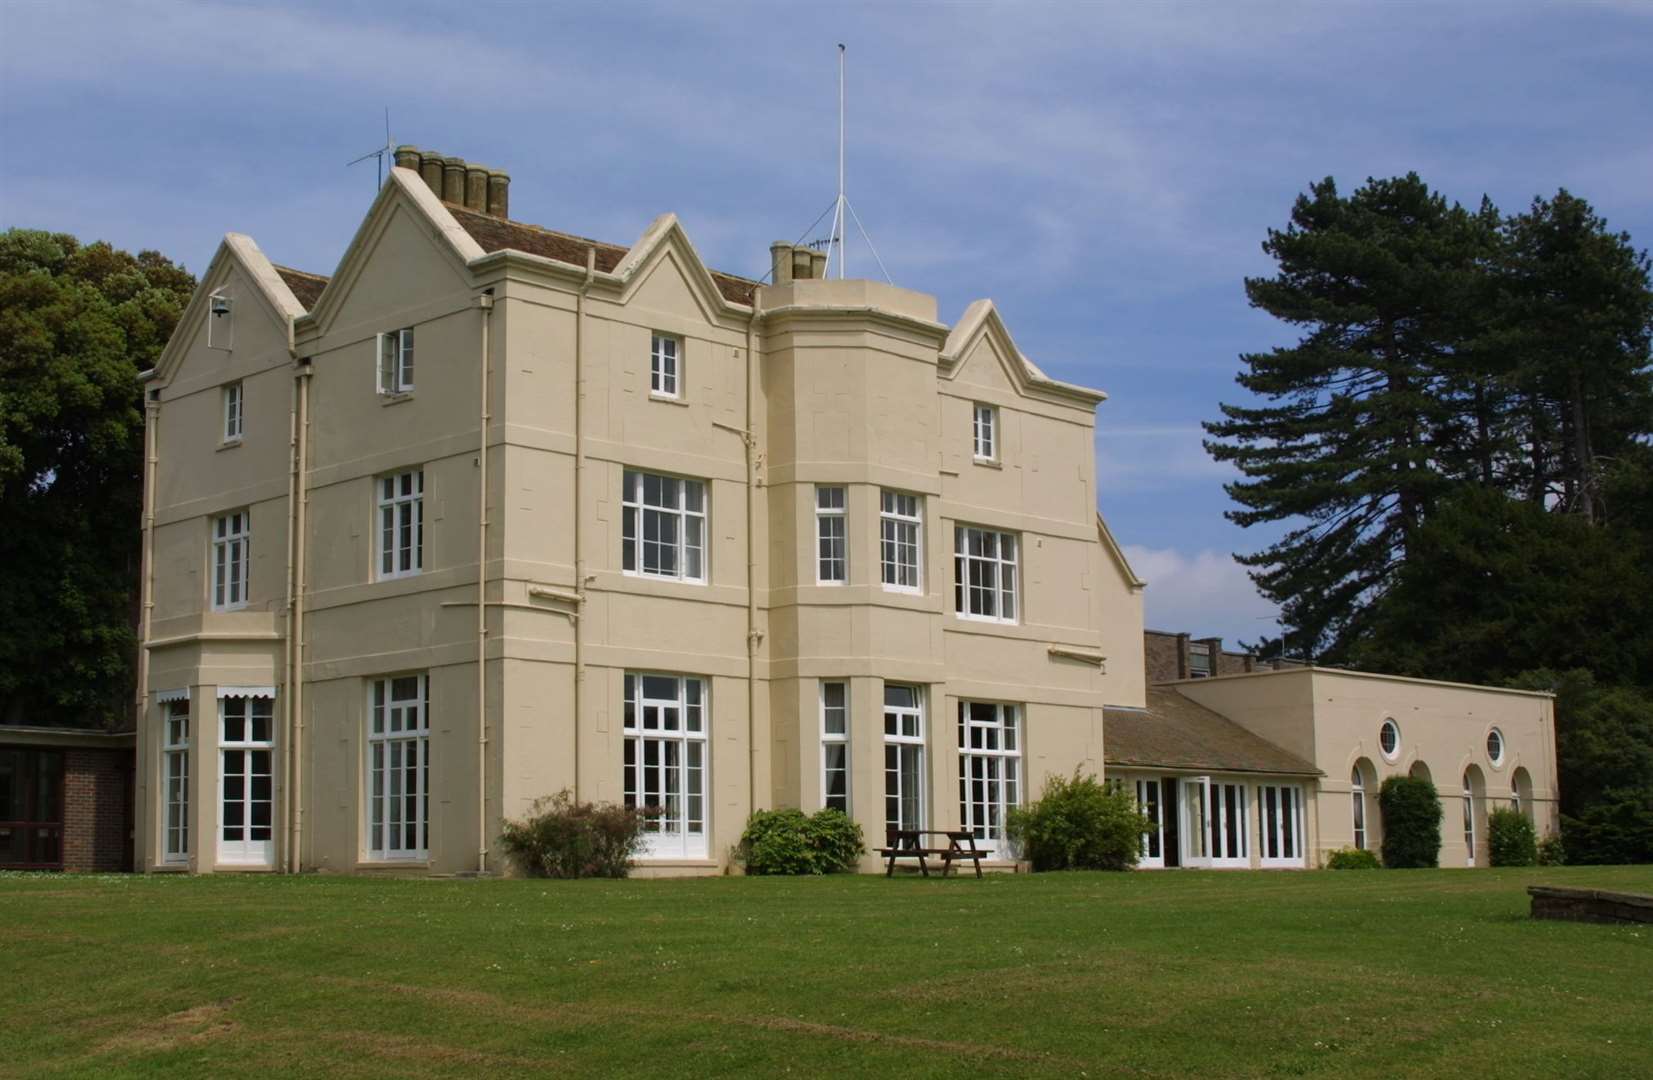 The site's main building, the Grade I listed Withersdane Hall